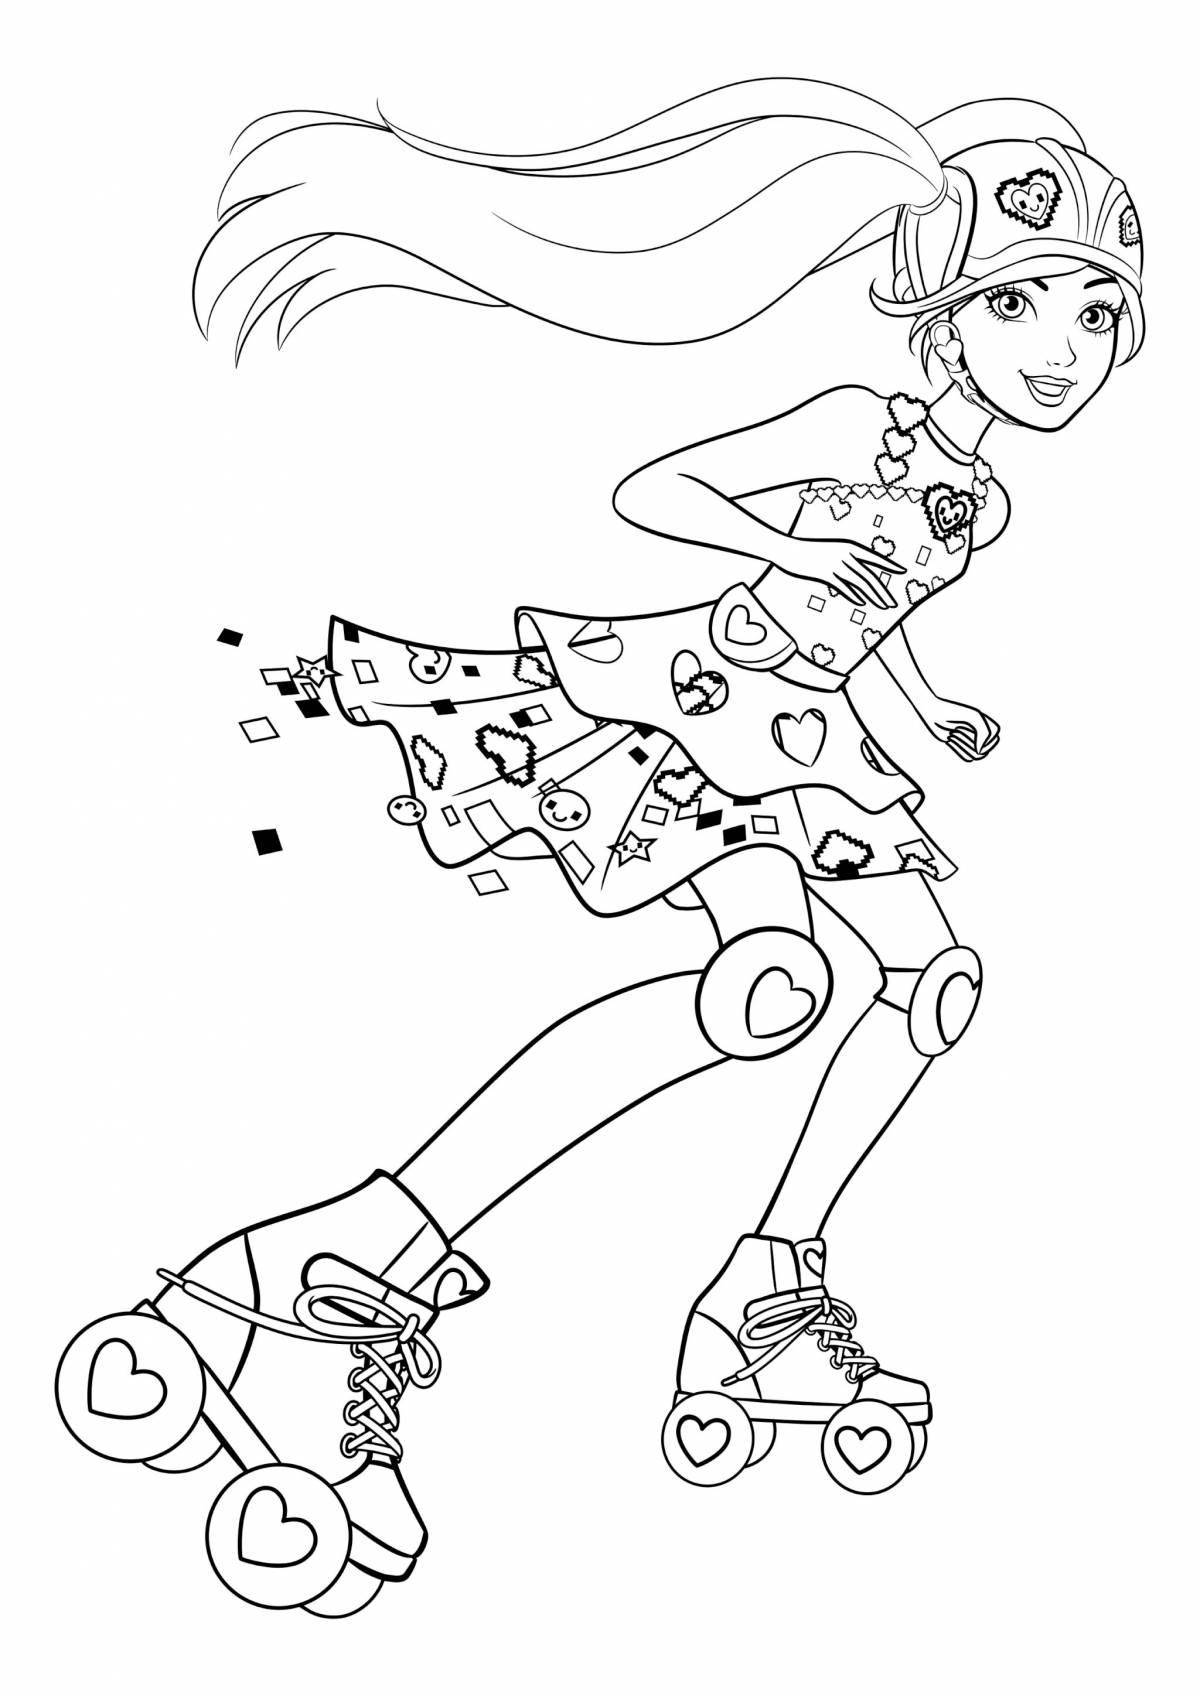 Chelsea magic doll coloring page